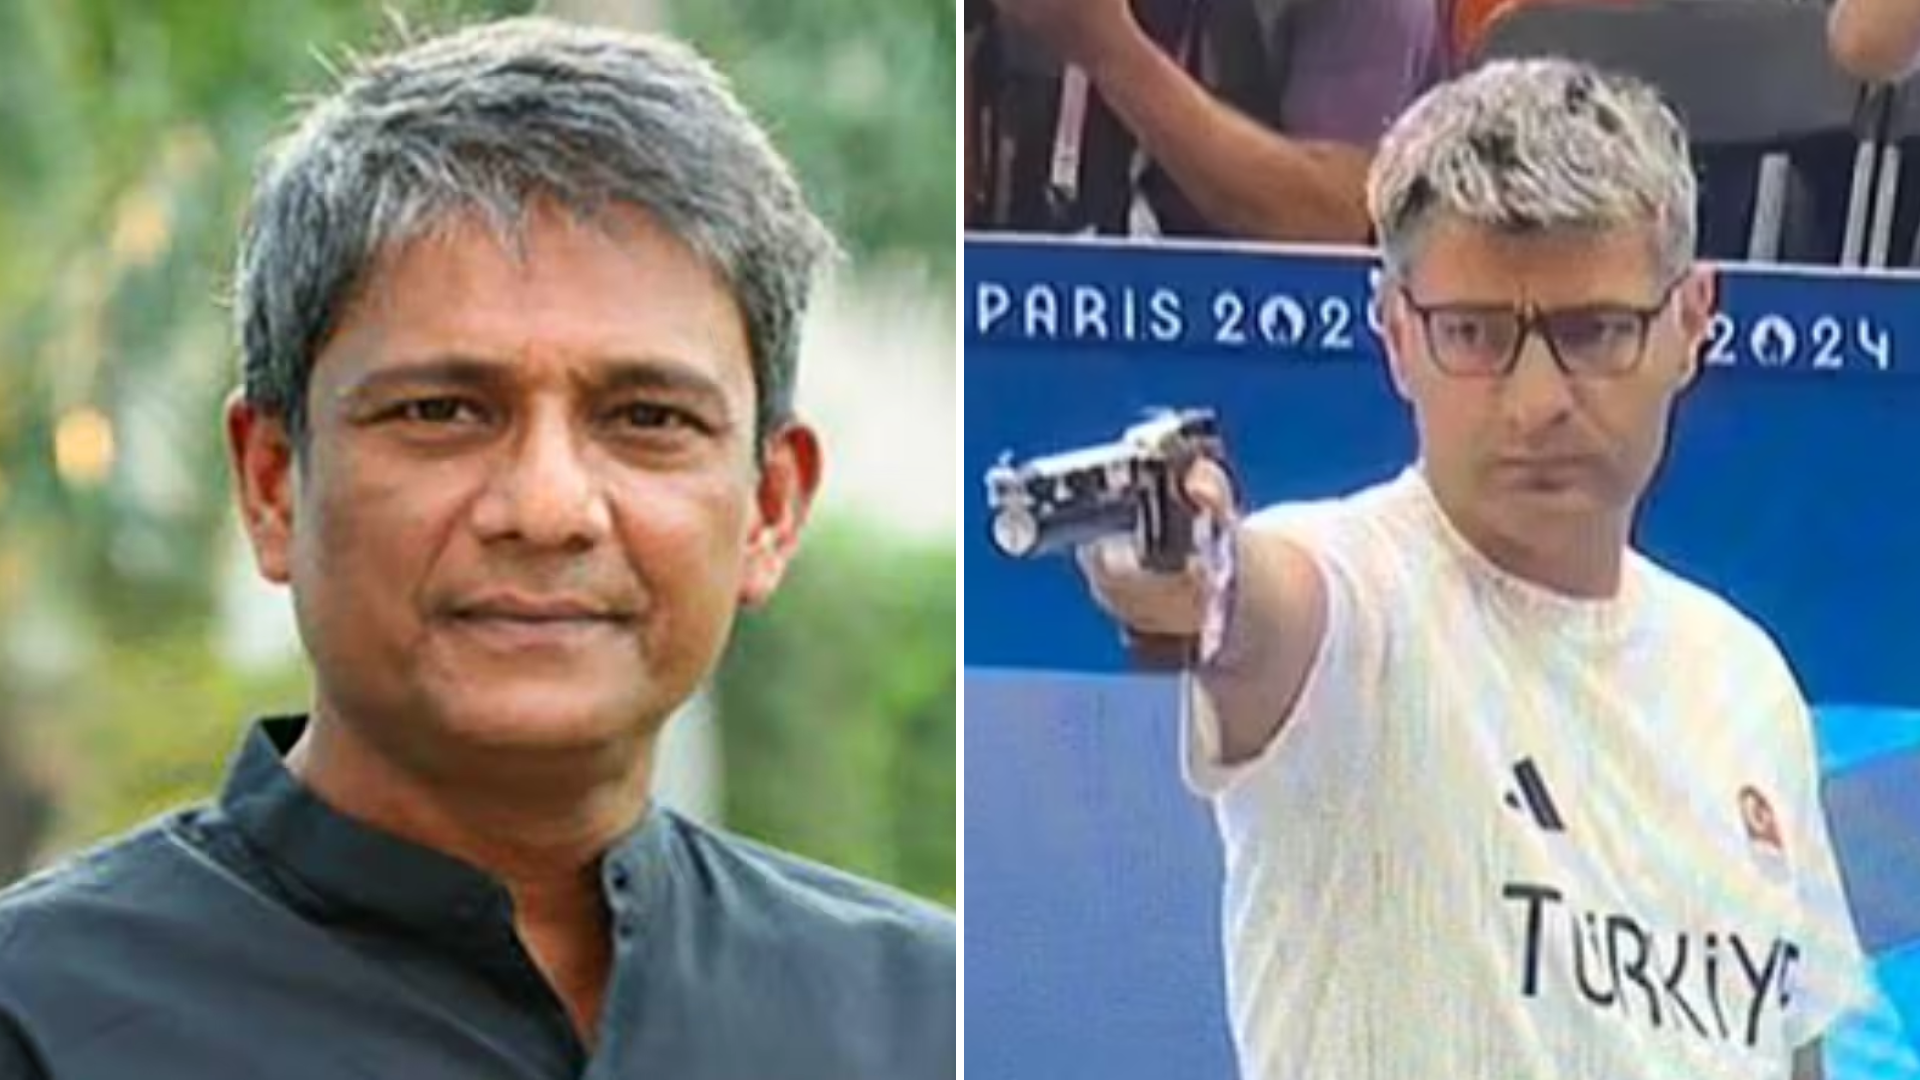 Adil Hussain Quips ‘Wish This Was True’ After Fan Confuses Him For Viral Turkish Shooter Yusuf Dikec